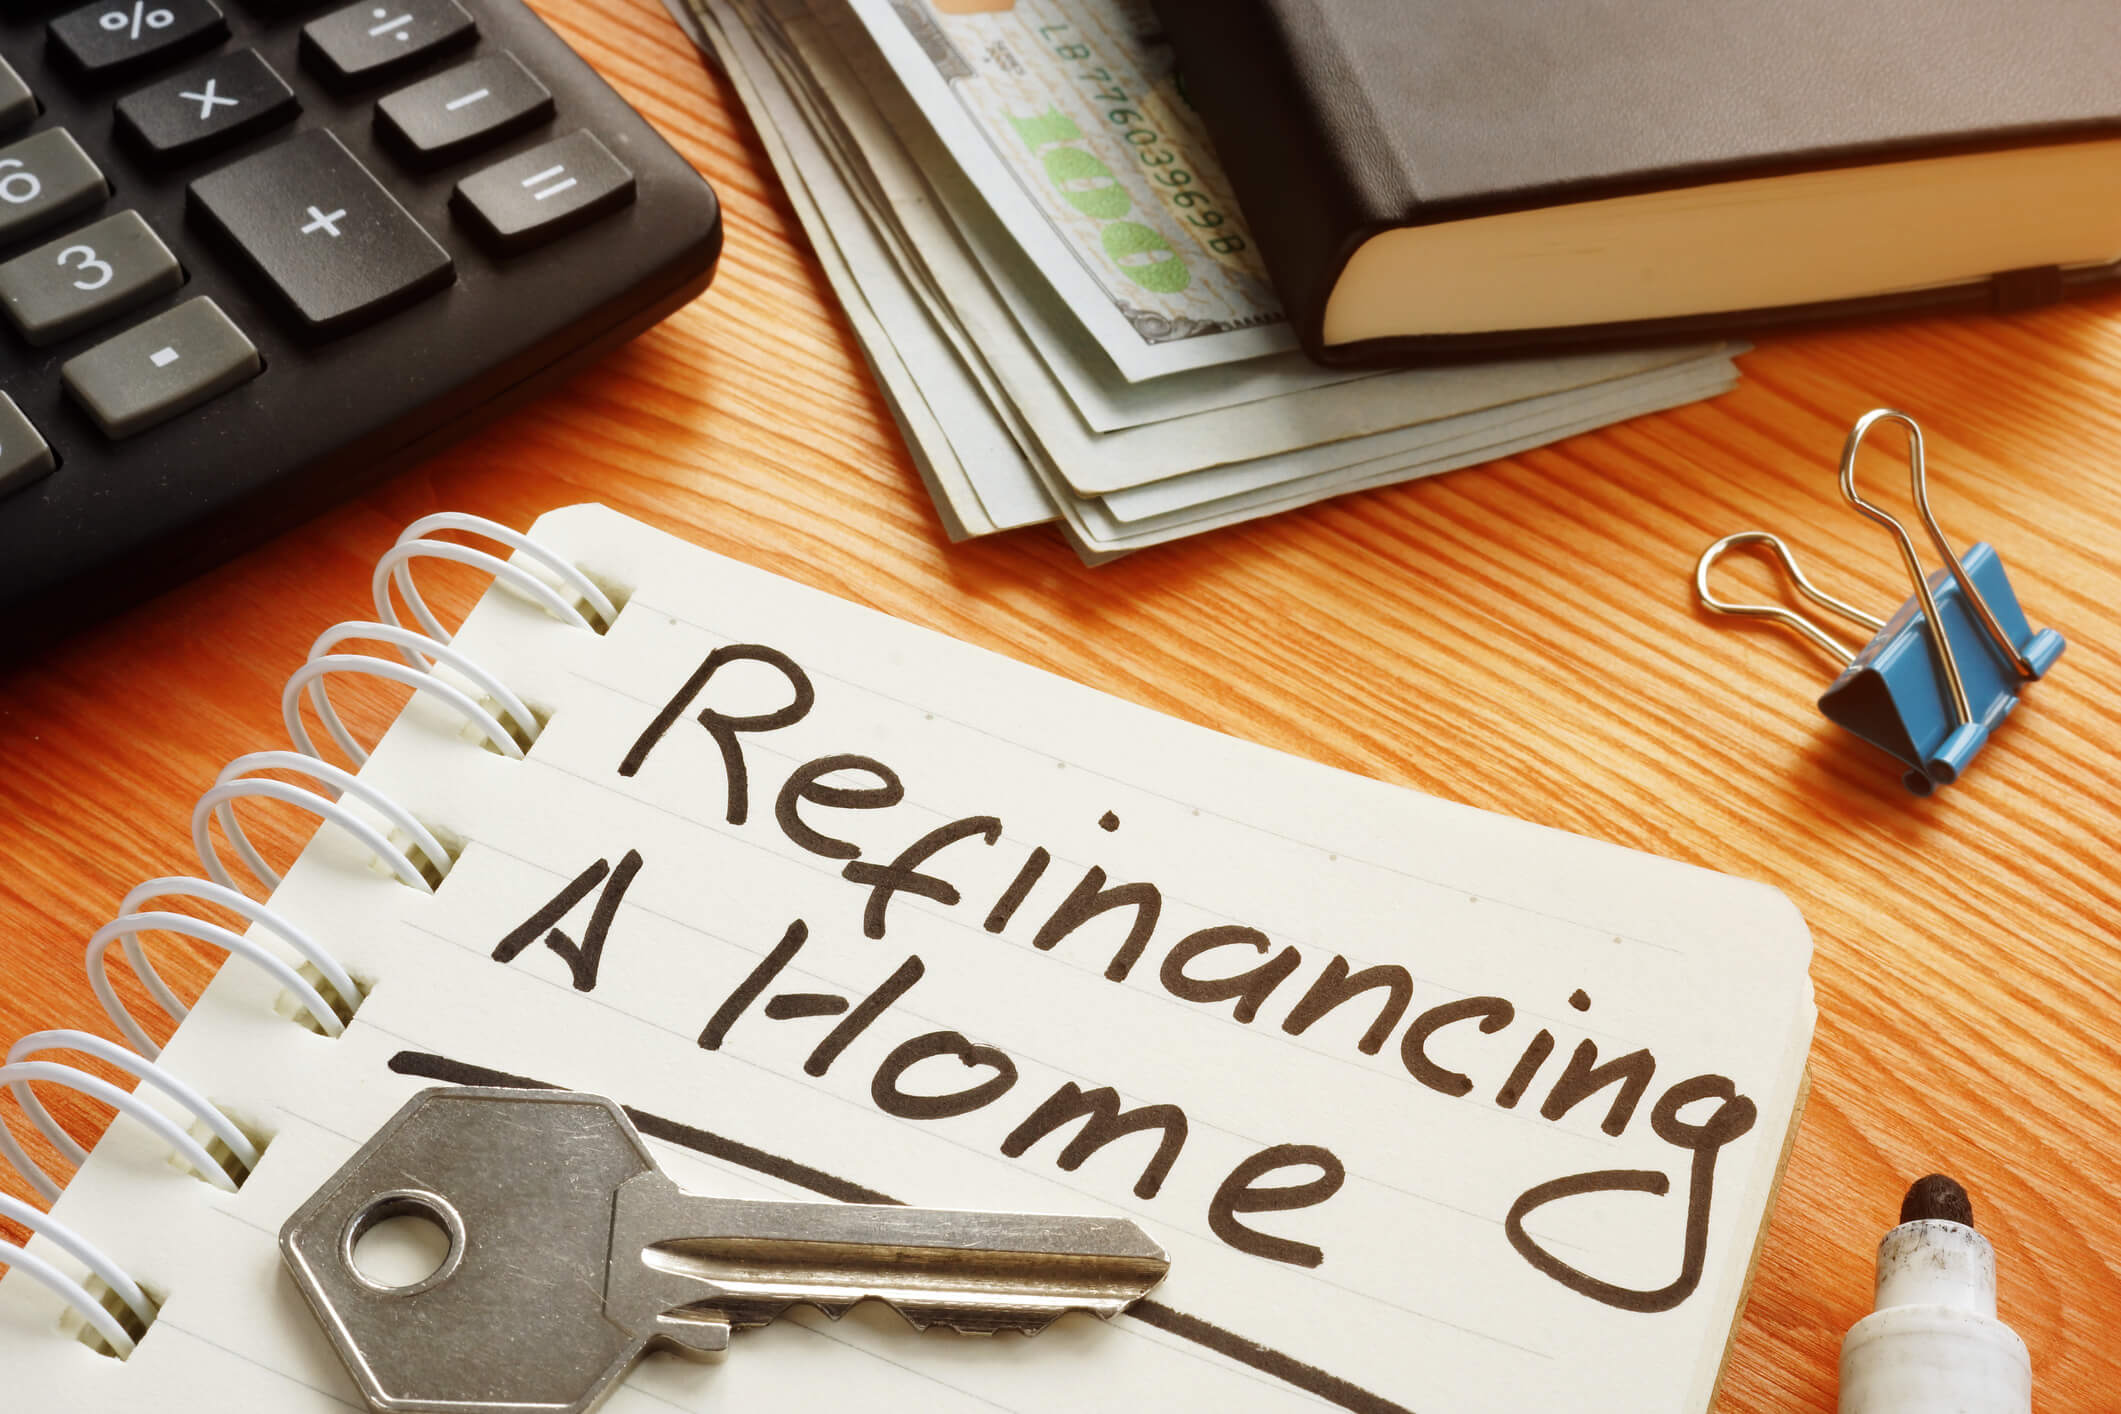 VA Refinance: How to Refinance a Conventional Mortgage to VA Loan